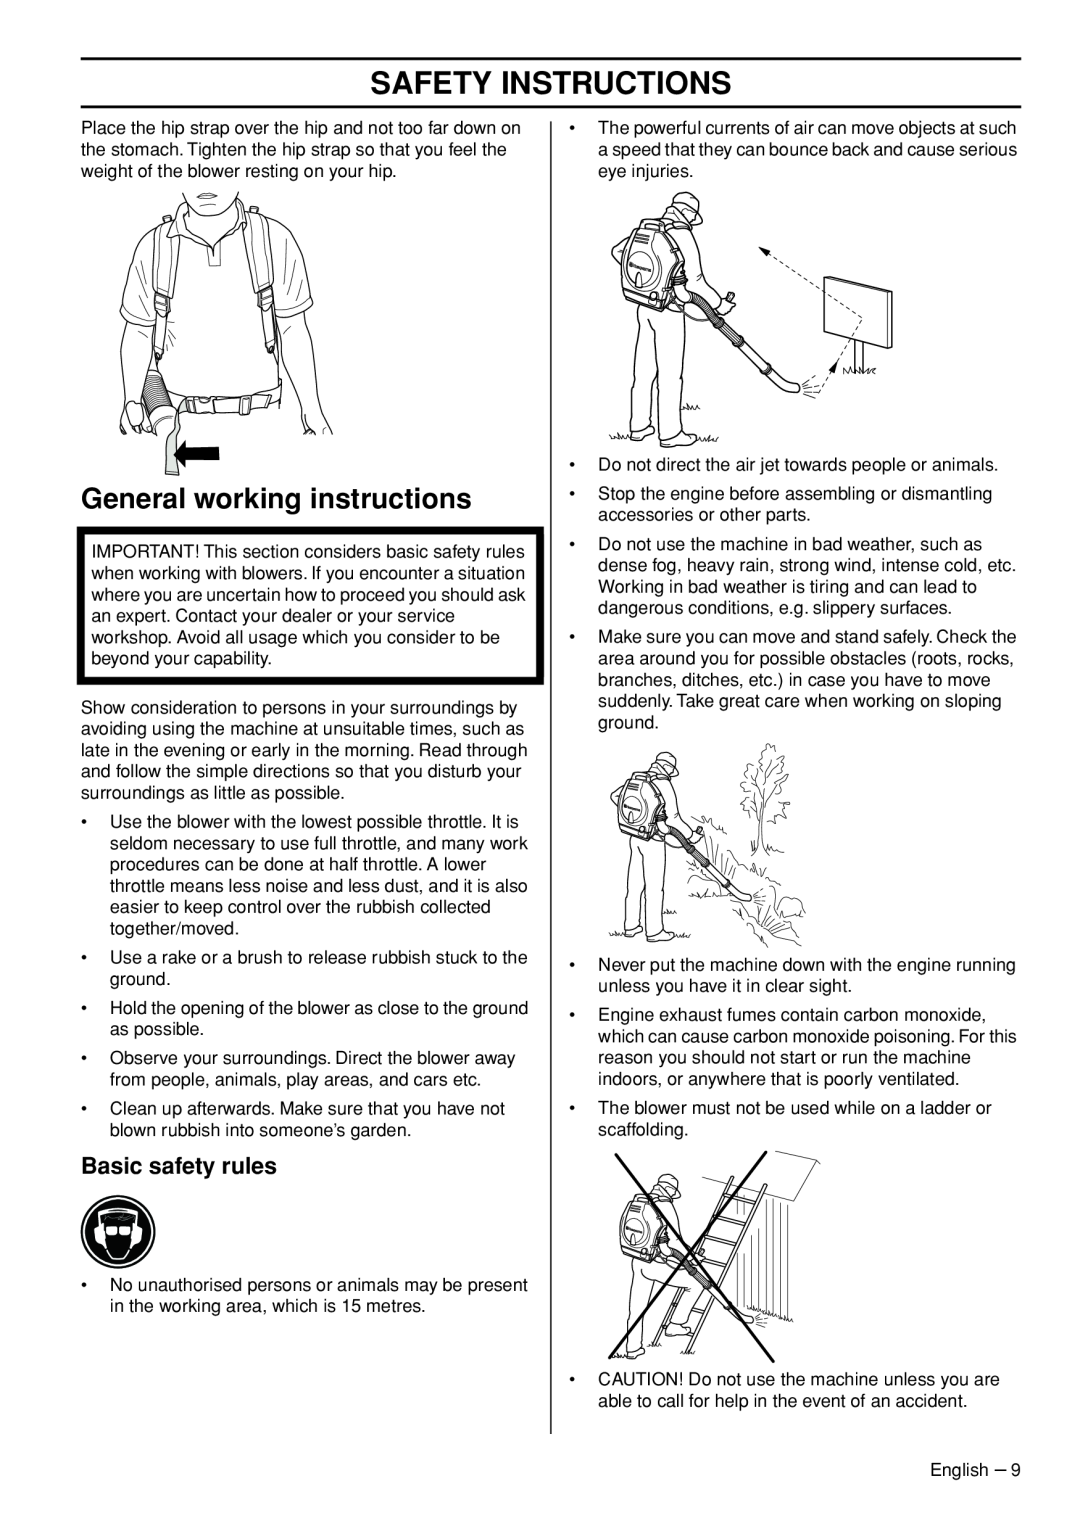 Husqvarna 1153191-26 manual General working instructions, Basic safety rules, Safety Instructions 